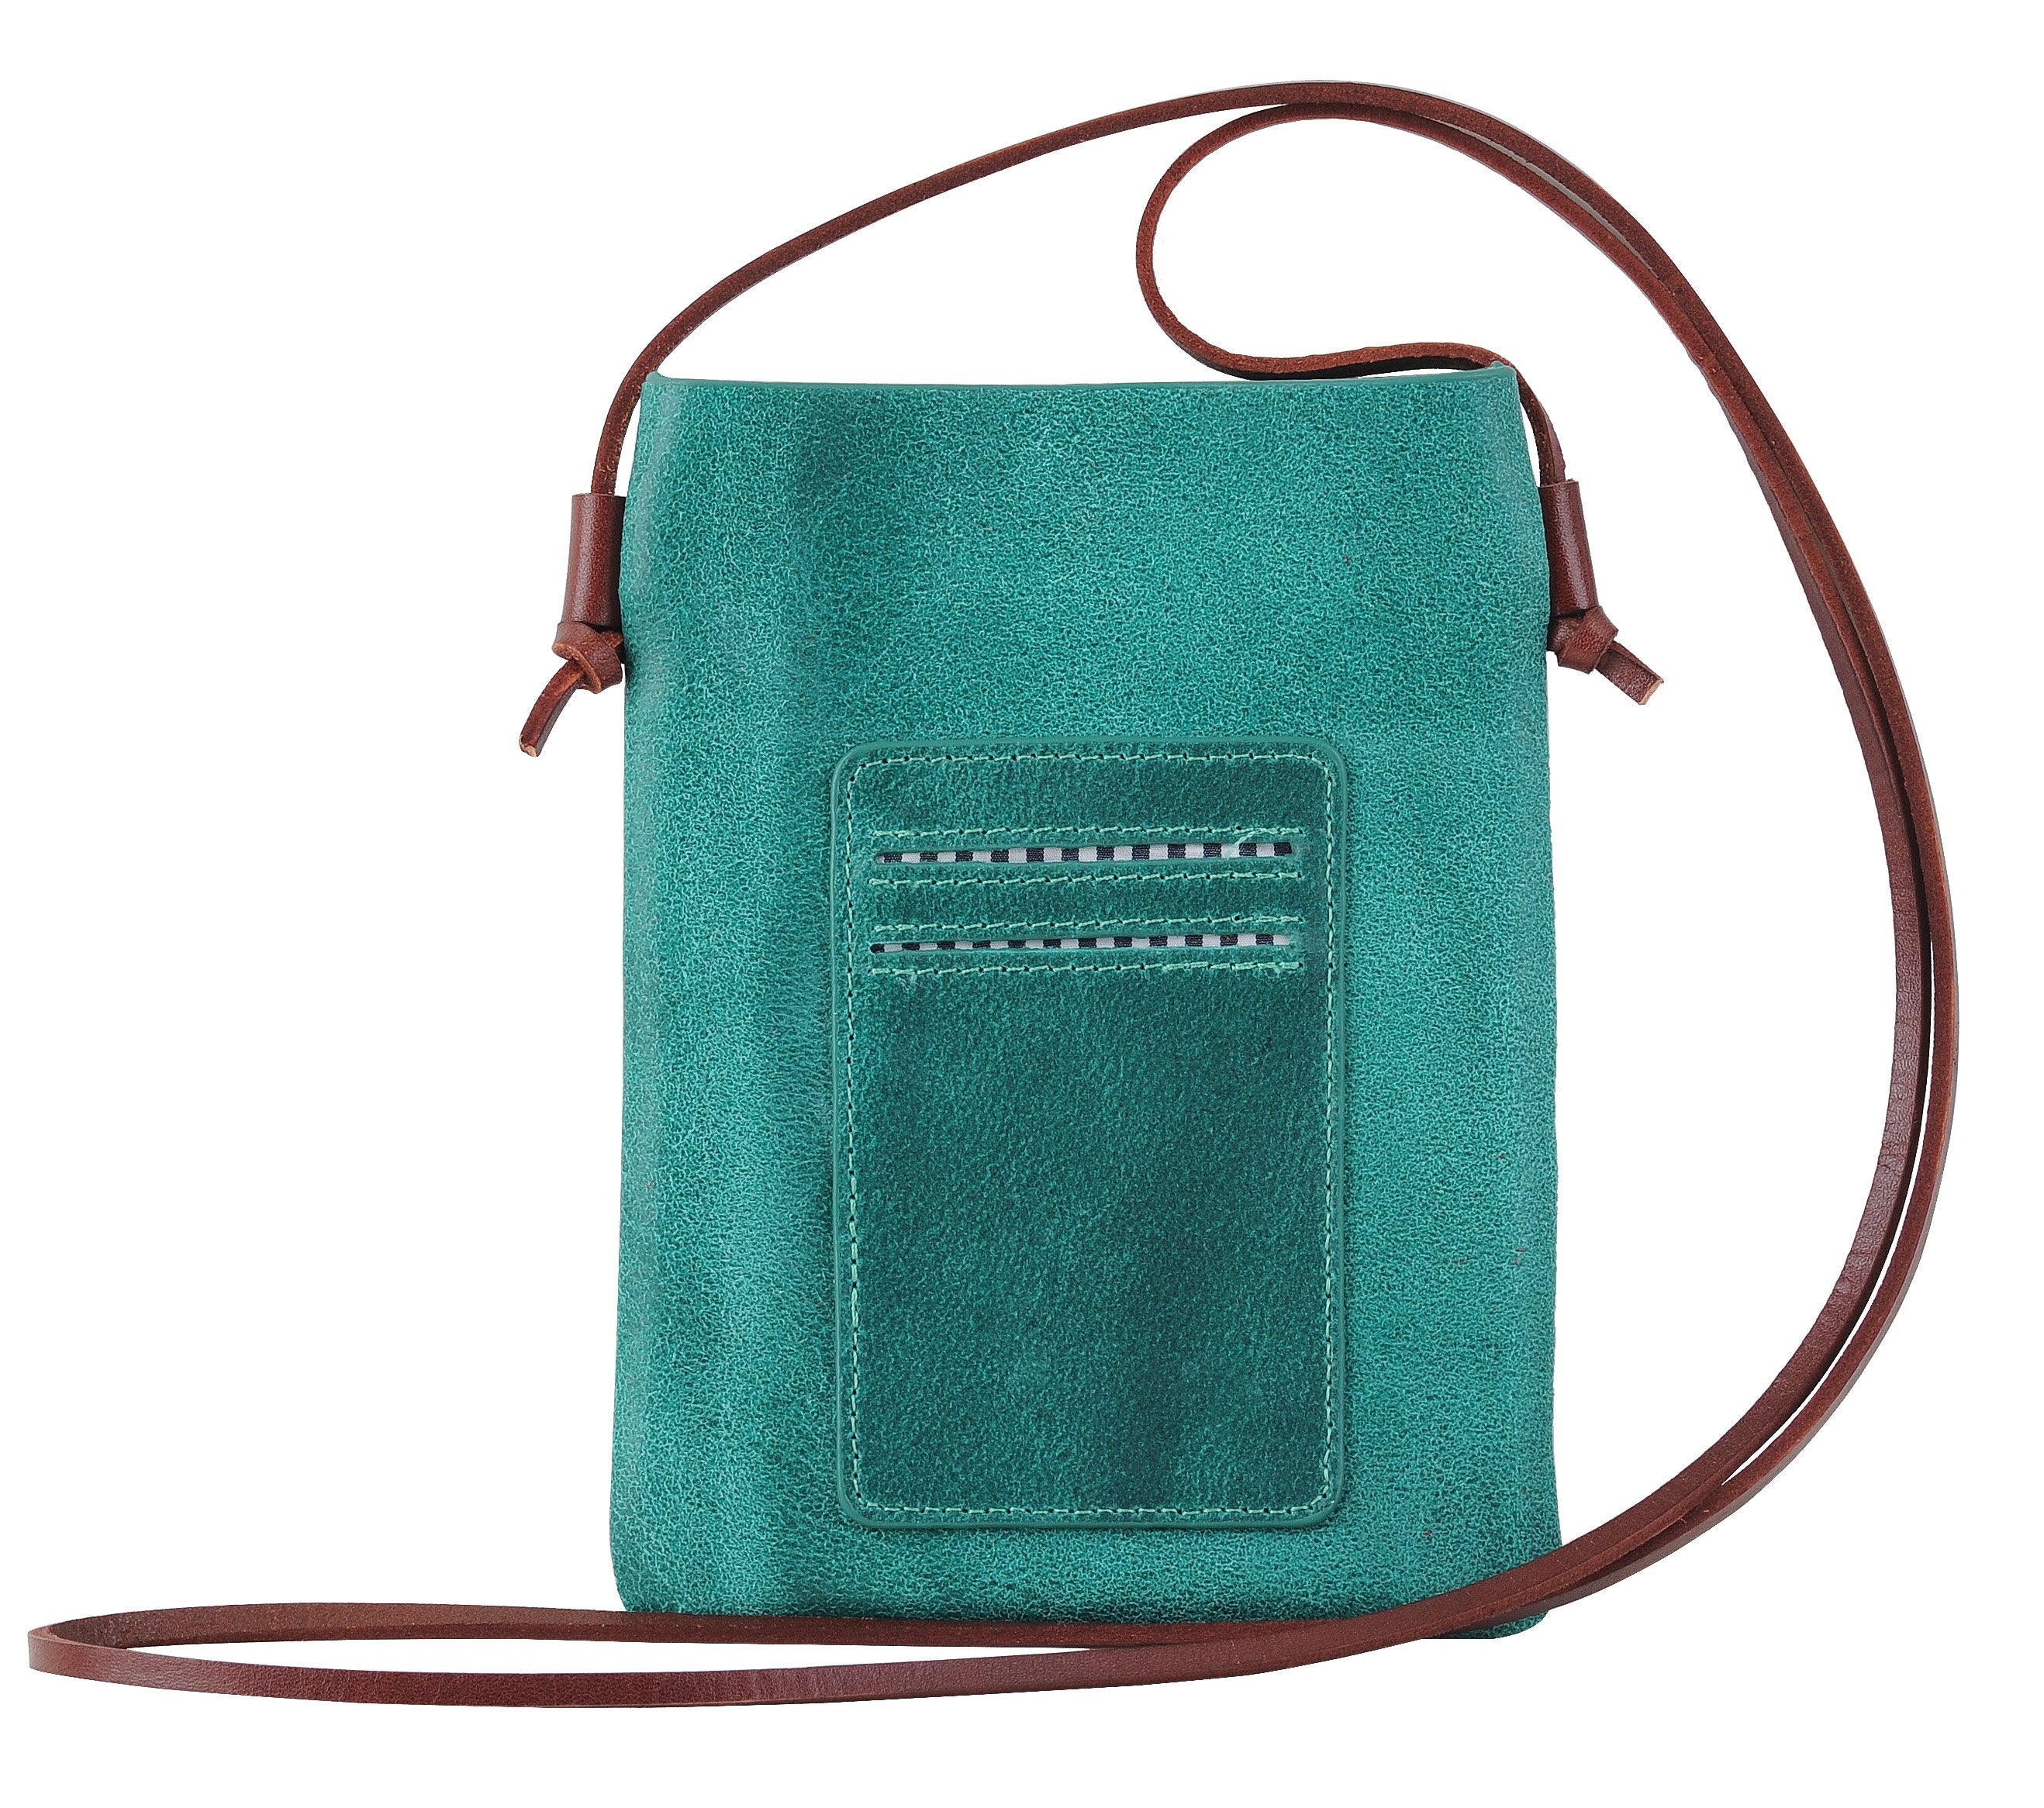 Okay, let's see how fast this will go as someone is going to get an insane  deal on this limited edition crossbody bag!